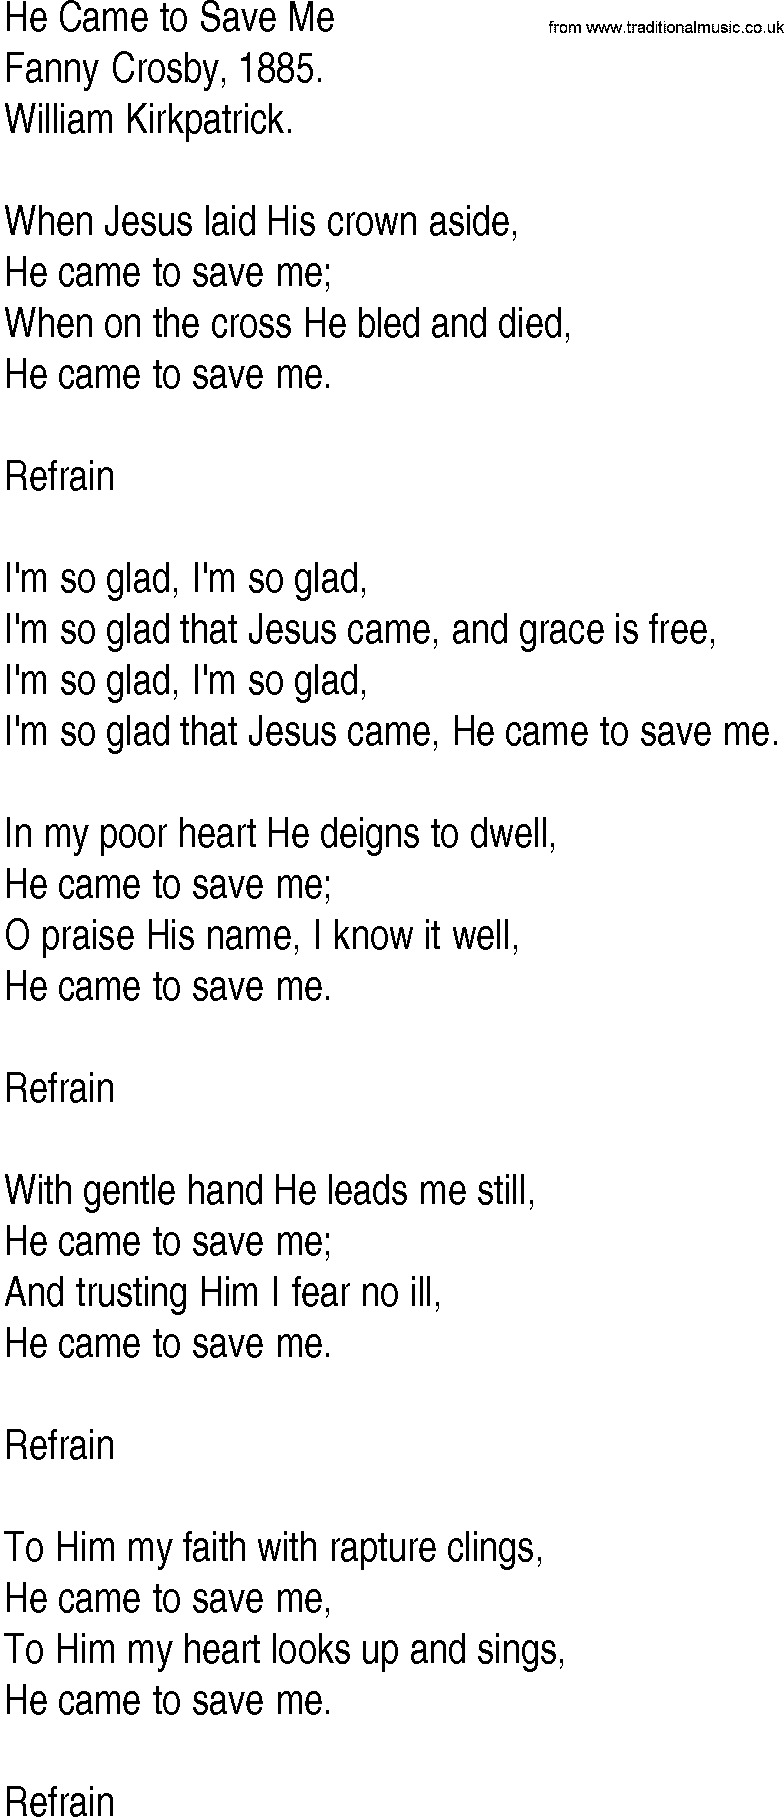 Hymn and Gospel Song: He Came to Save Me by Fanny Crosby lyrics